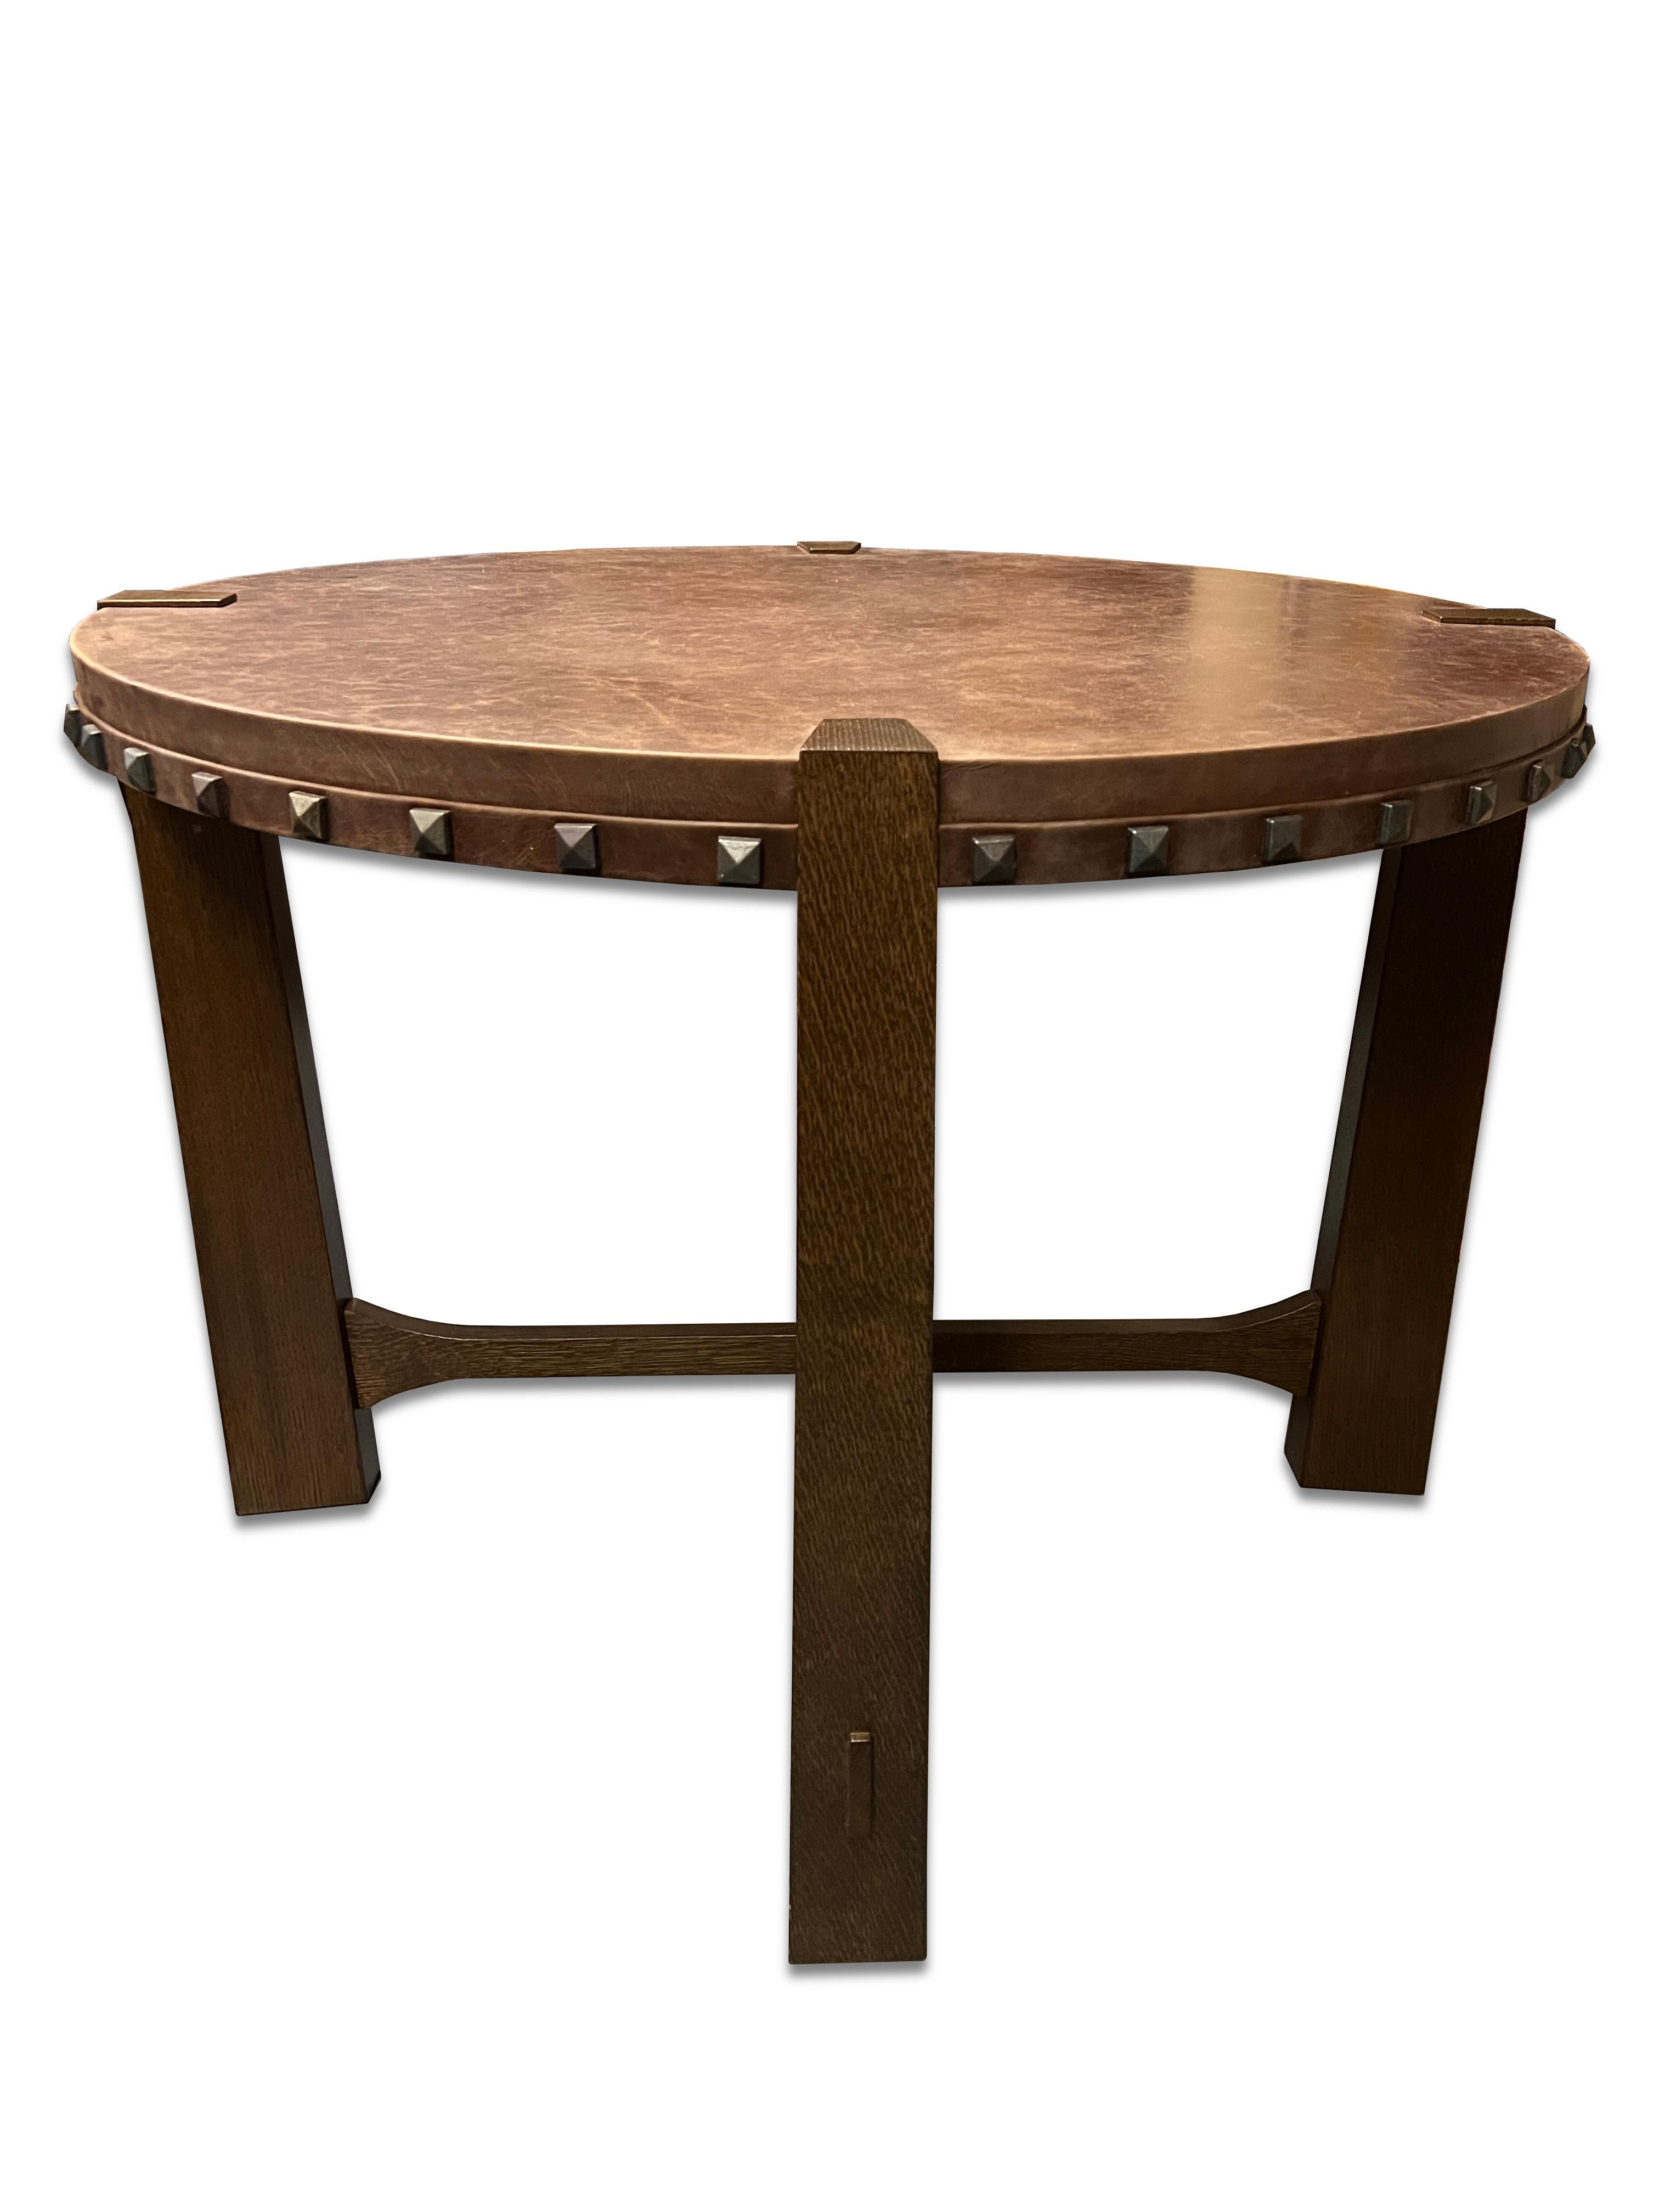 American Leather Table with Studs